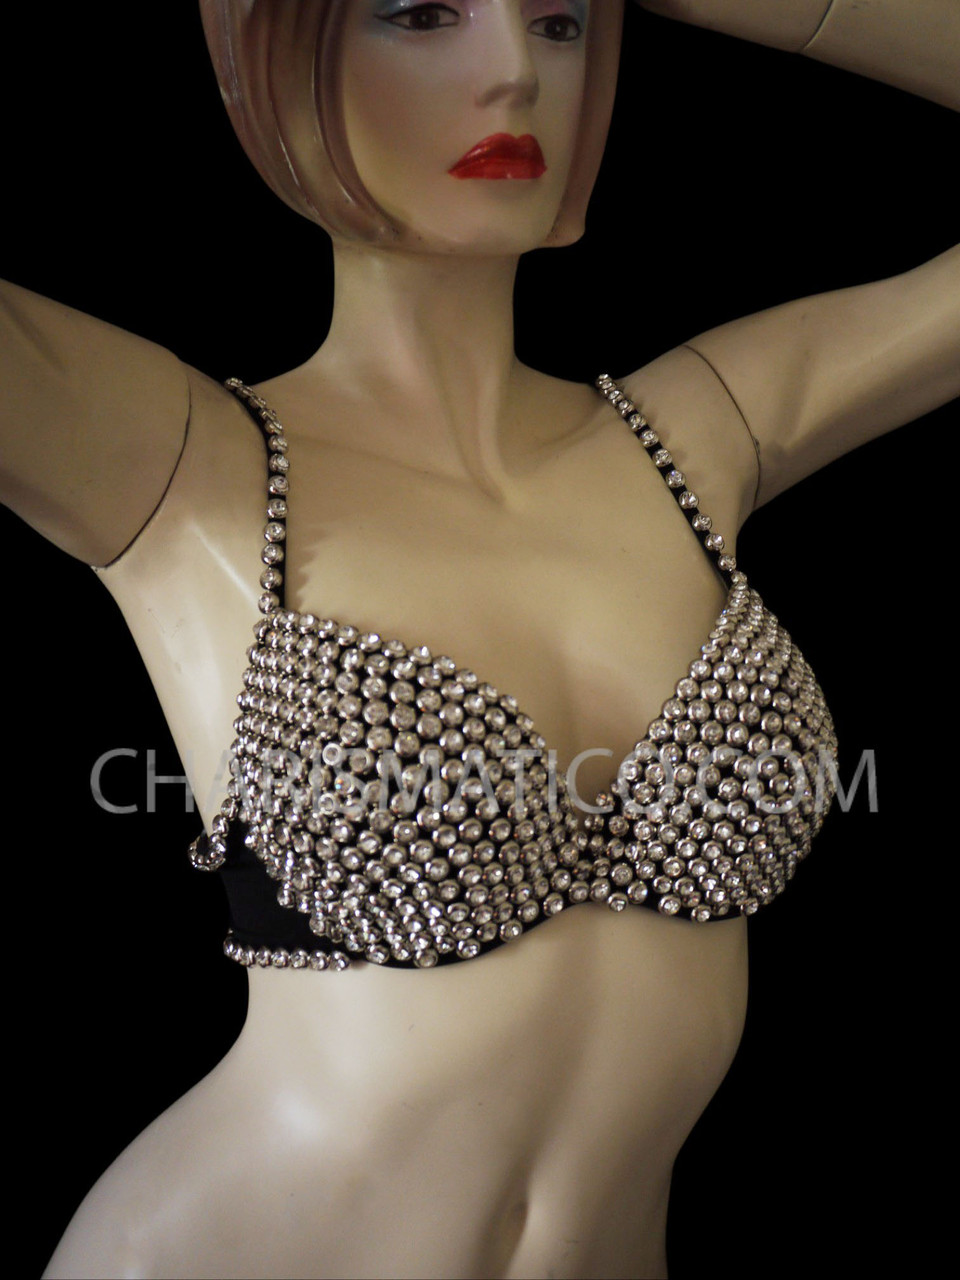 GOTH CLUB Convertible Bra. Detachable Straps. Black Jeweled Bra. Diva Wear.  Vintage 80's in Very Good Condition. Beaded. Ornate. 